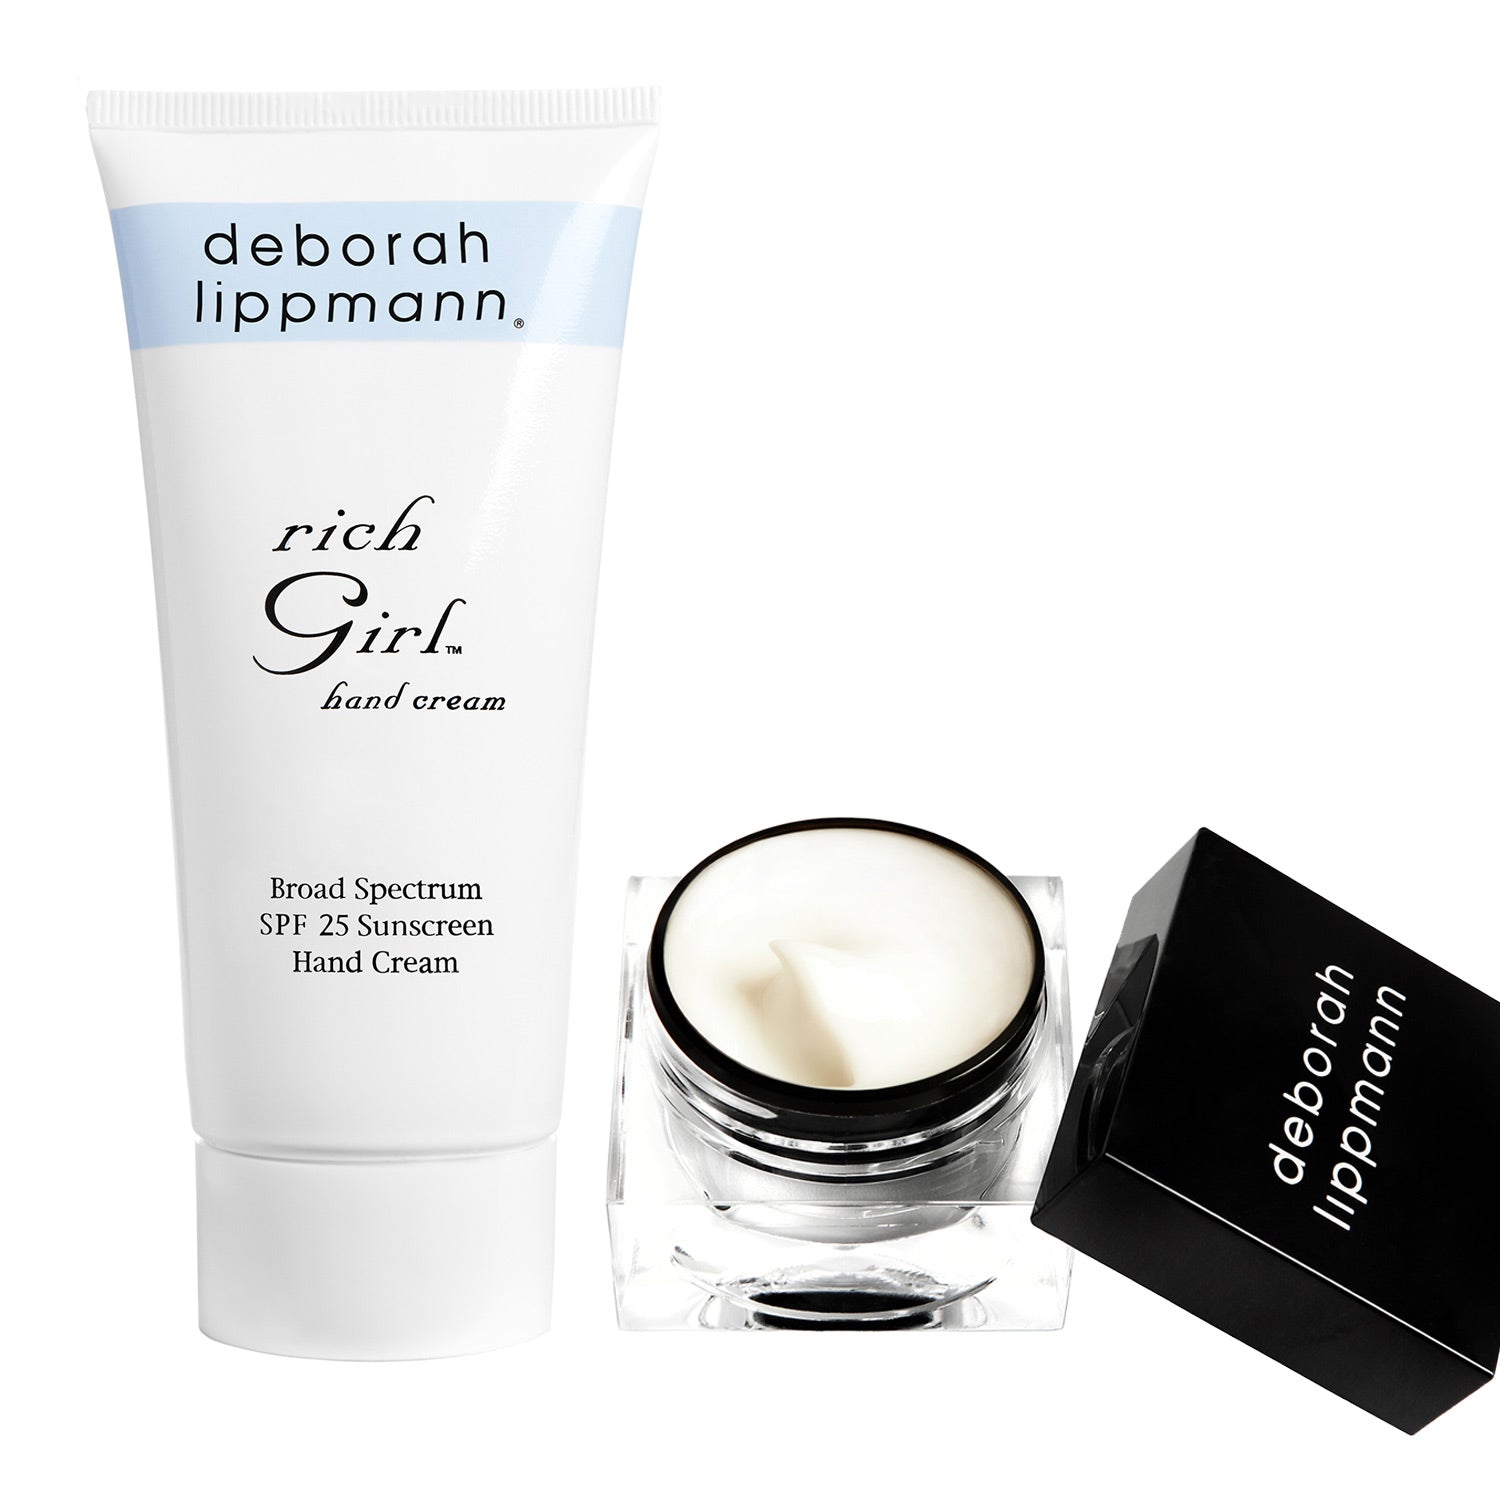 Rich Girl SPF hand cream and The Cure cuticle cream bundle